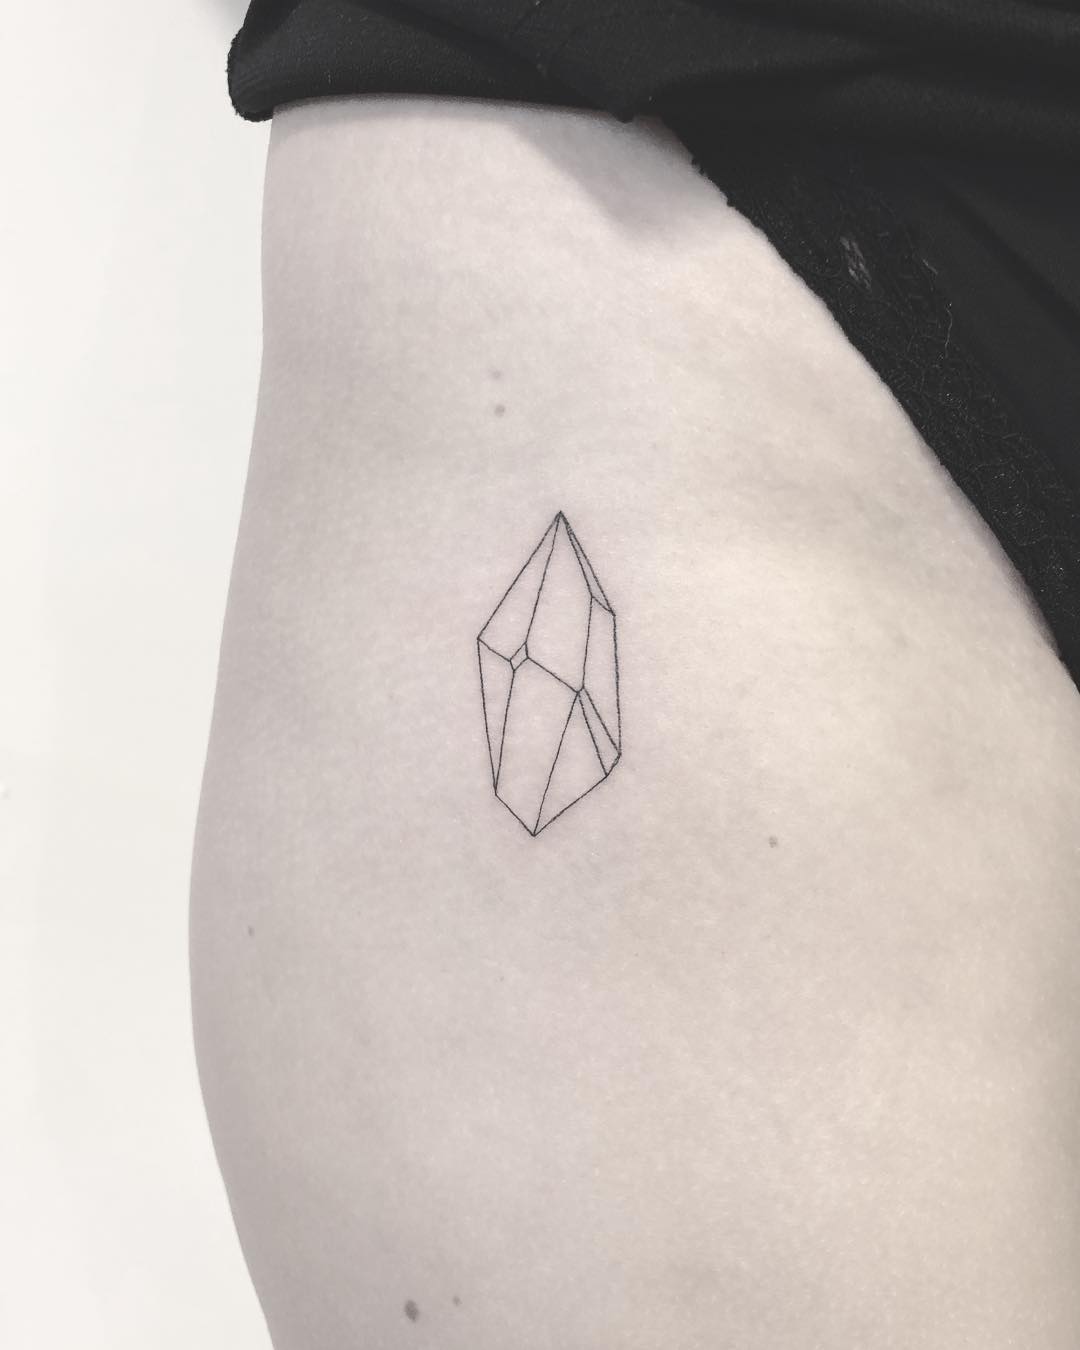 Tiny crystal tattoo by Annelie Fransson 